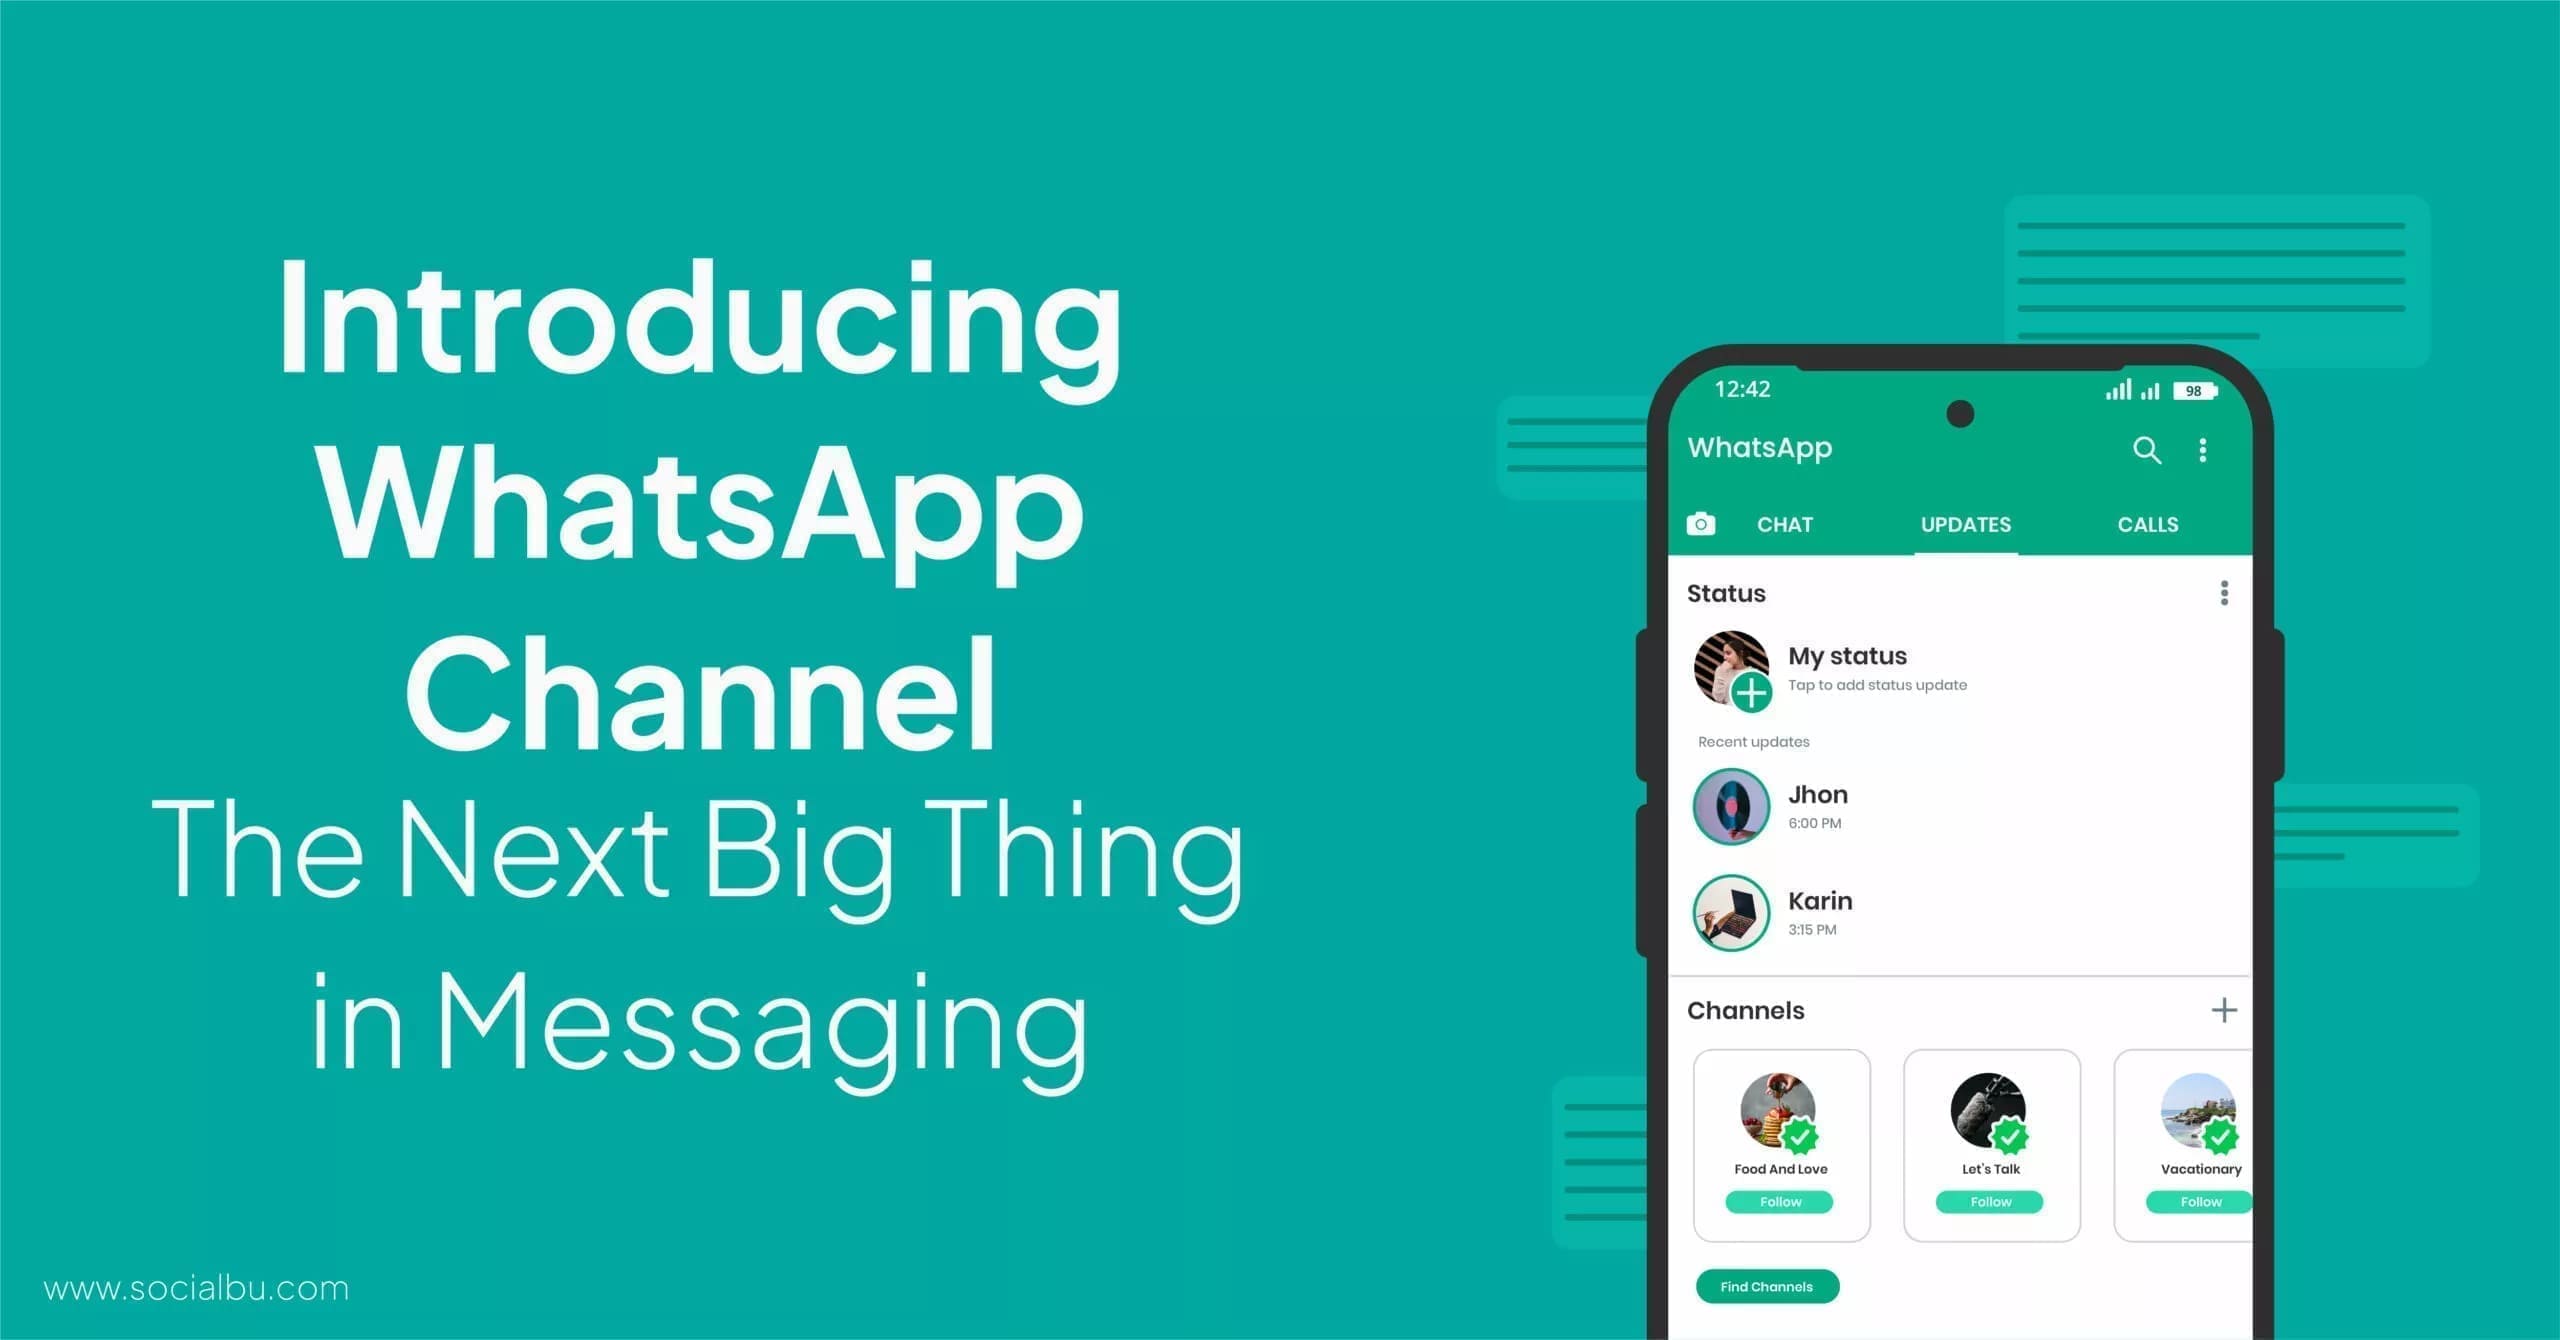 WhatsApp Channel - The Next Big Thing in Messaging